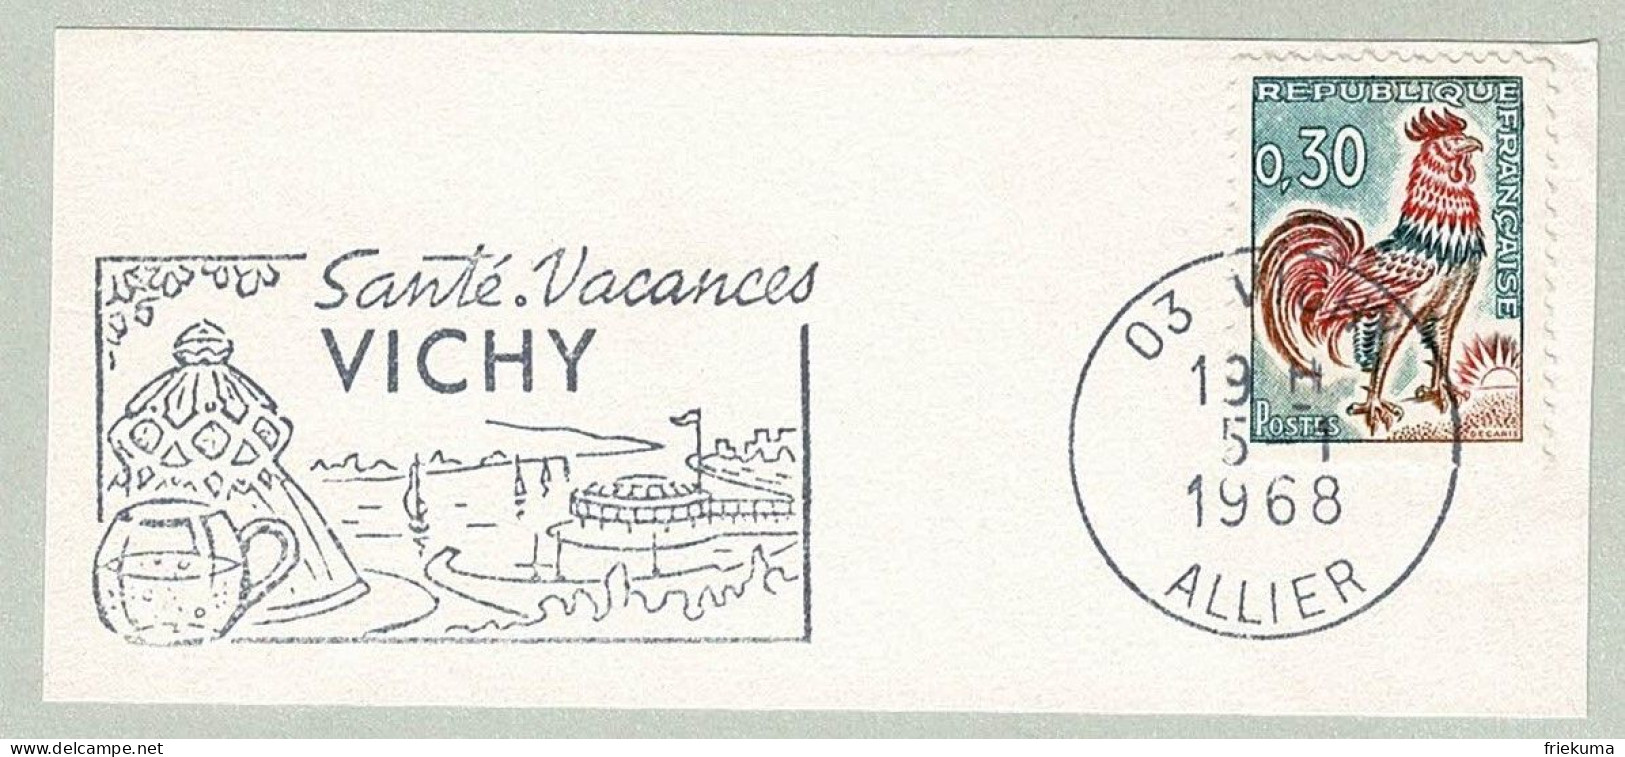 Frankreich / France 1968, Flaggenstempel Vichy, Thermalbad / Centre Thermal - Kuurwezen